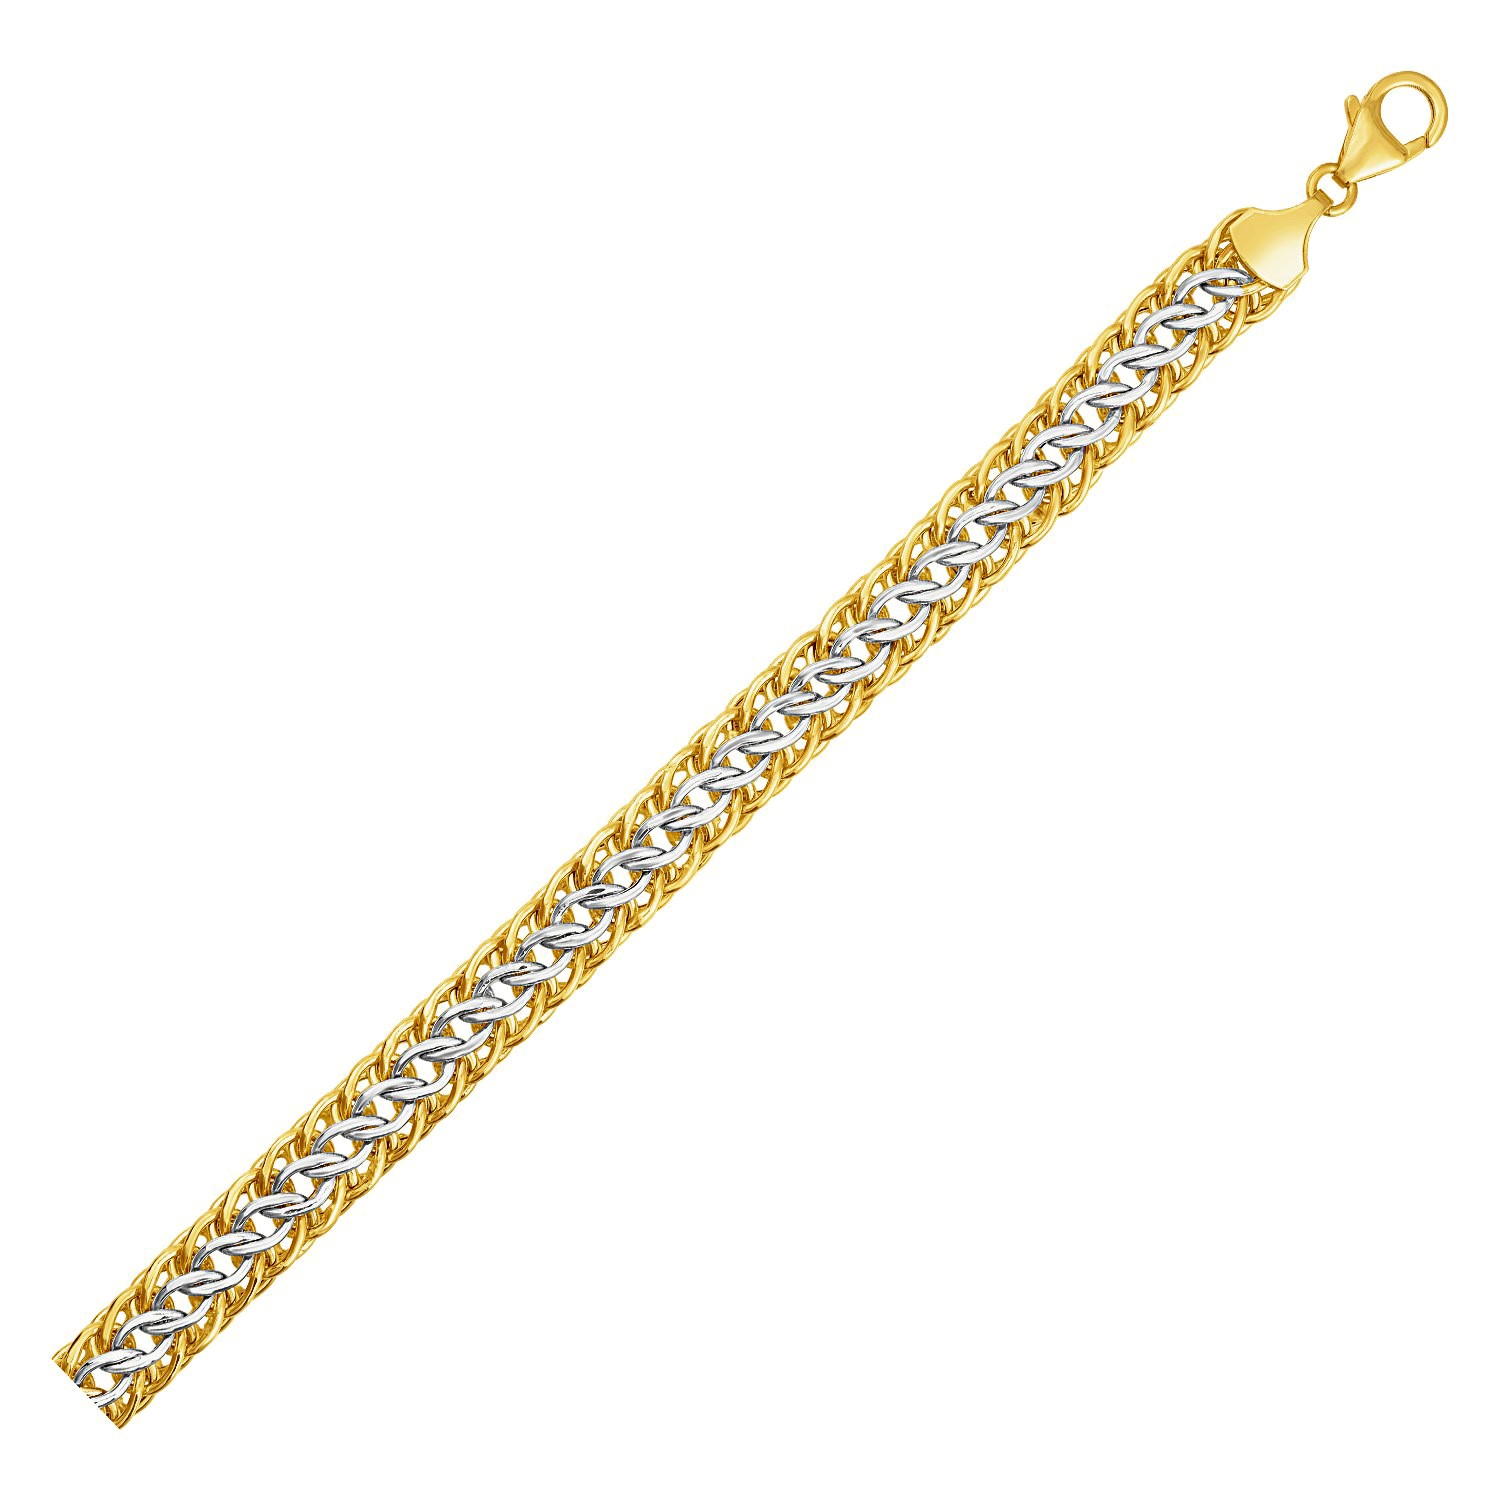  SEWACC 750 Pcs S-Shaped Connecting Rod Bracelet Connectors  Bracelet Making Supplies Bracelet Supplies Jewelry Connecting Rods Earring  Charms for Jewelry Making Sun Warrior Brass Golden